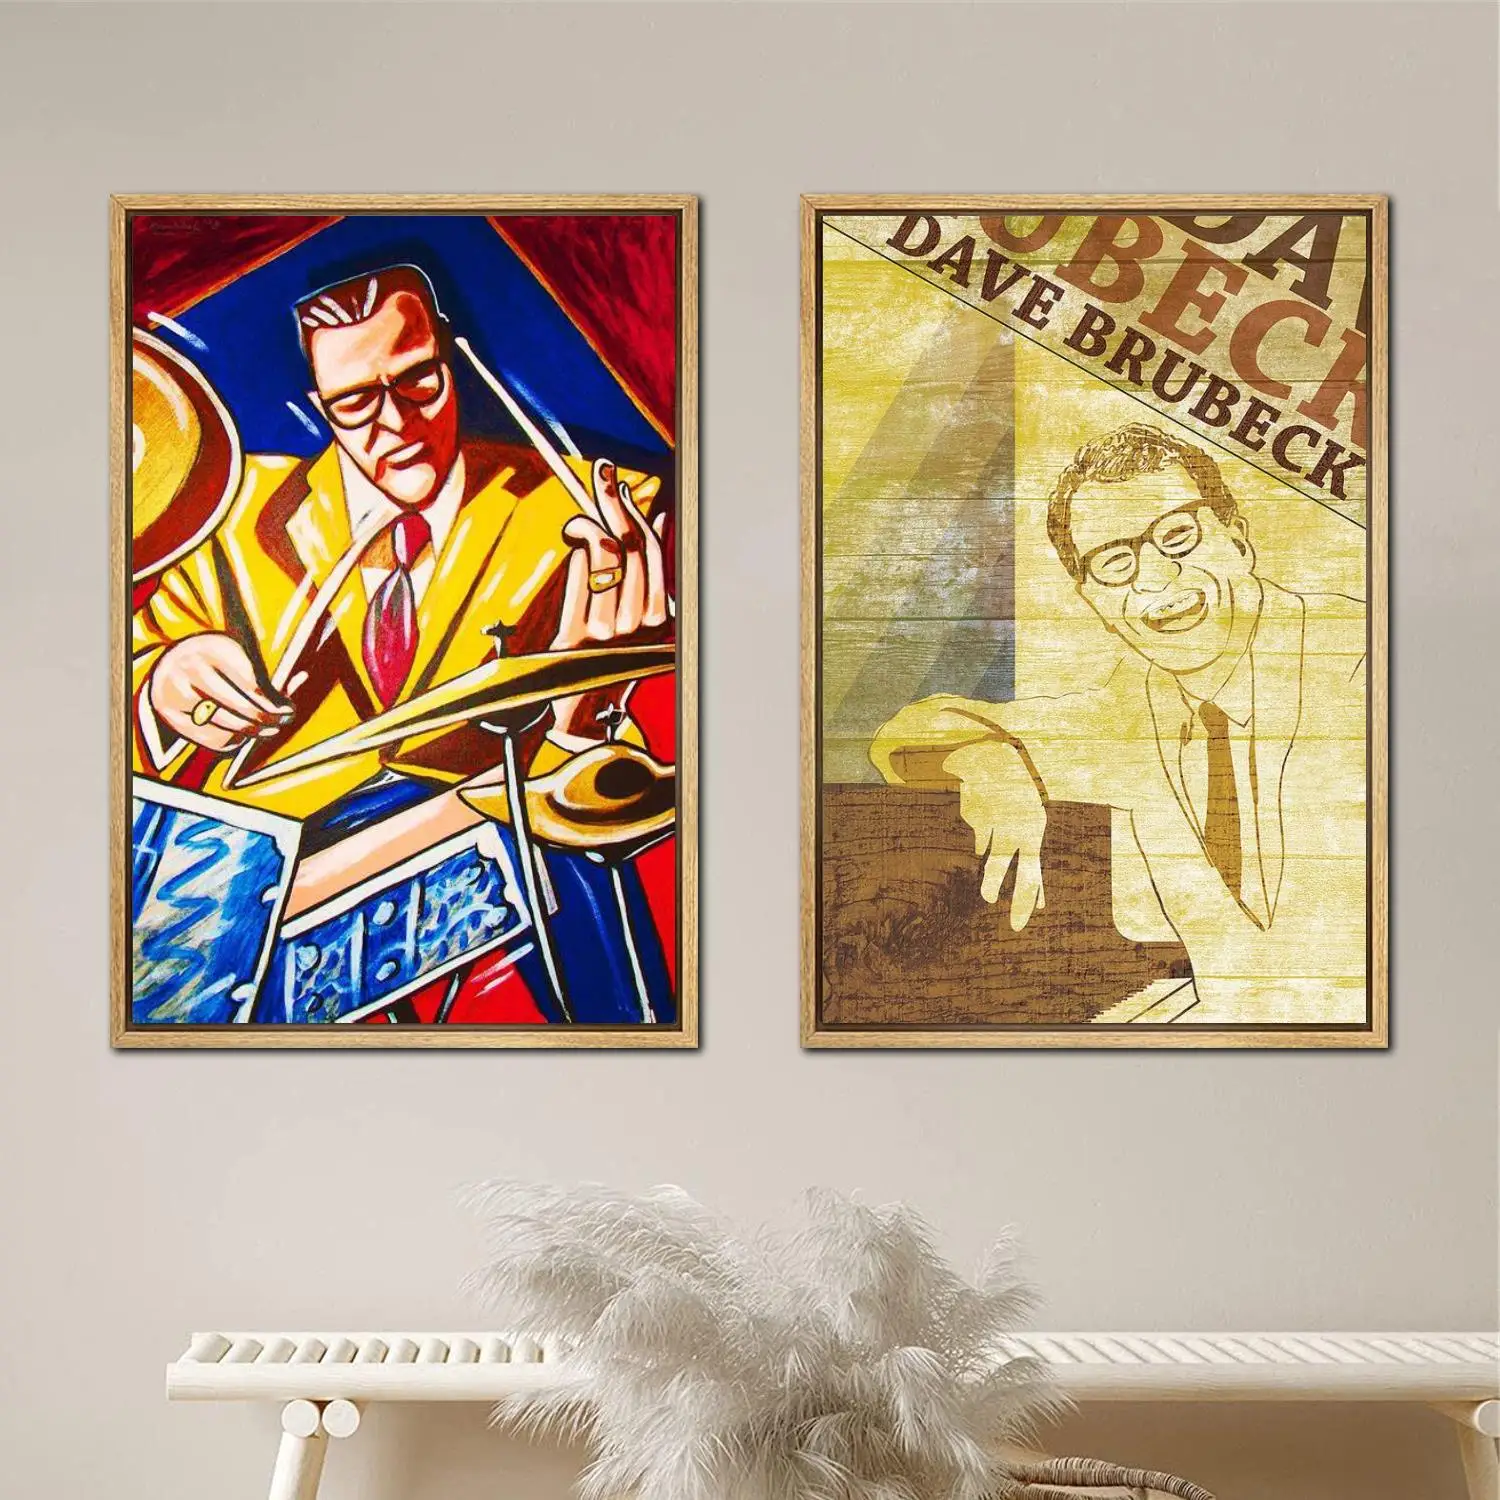 

Dave Brubeck Poster Painting 24x36 Wall Art Canvas Posters room decor Modern Family bedroom Decoration Art wall decor